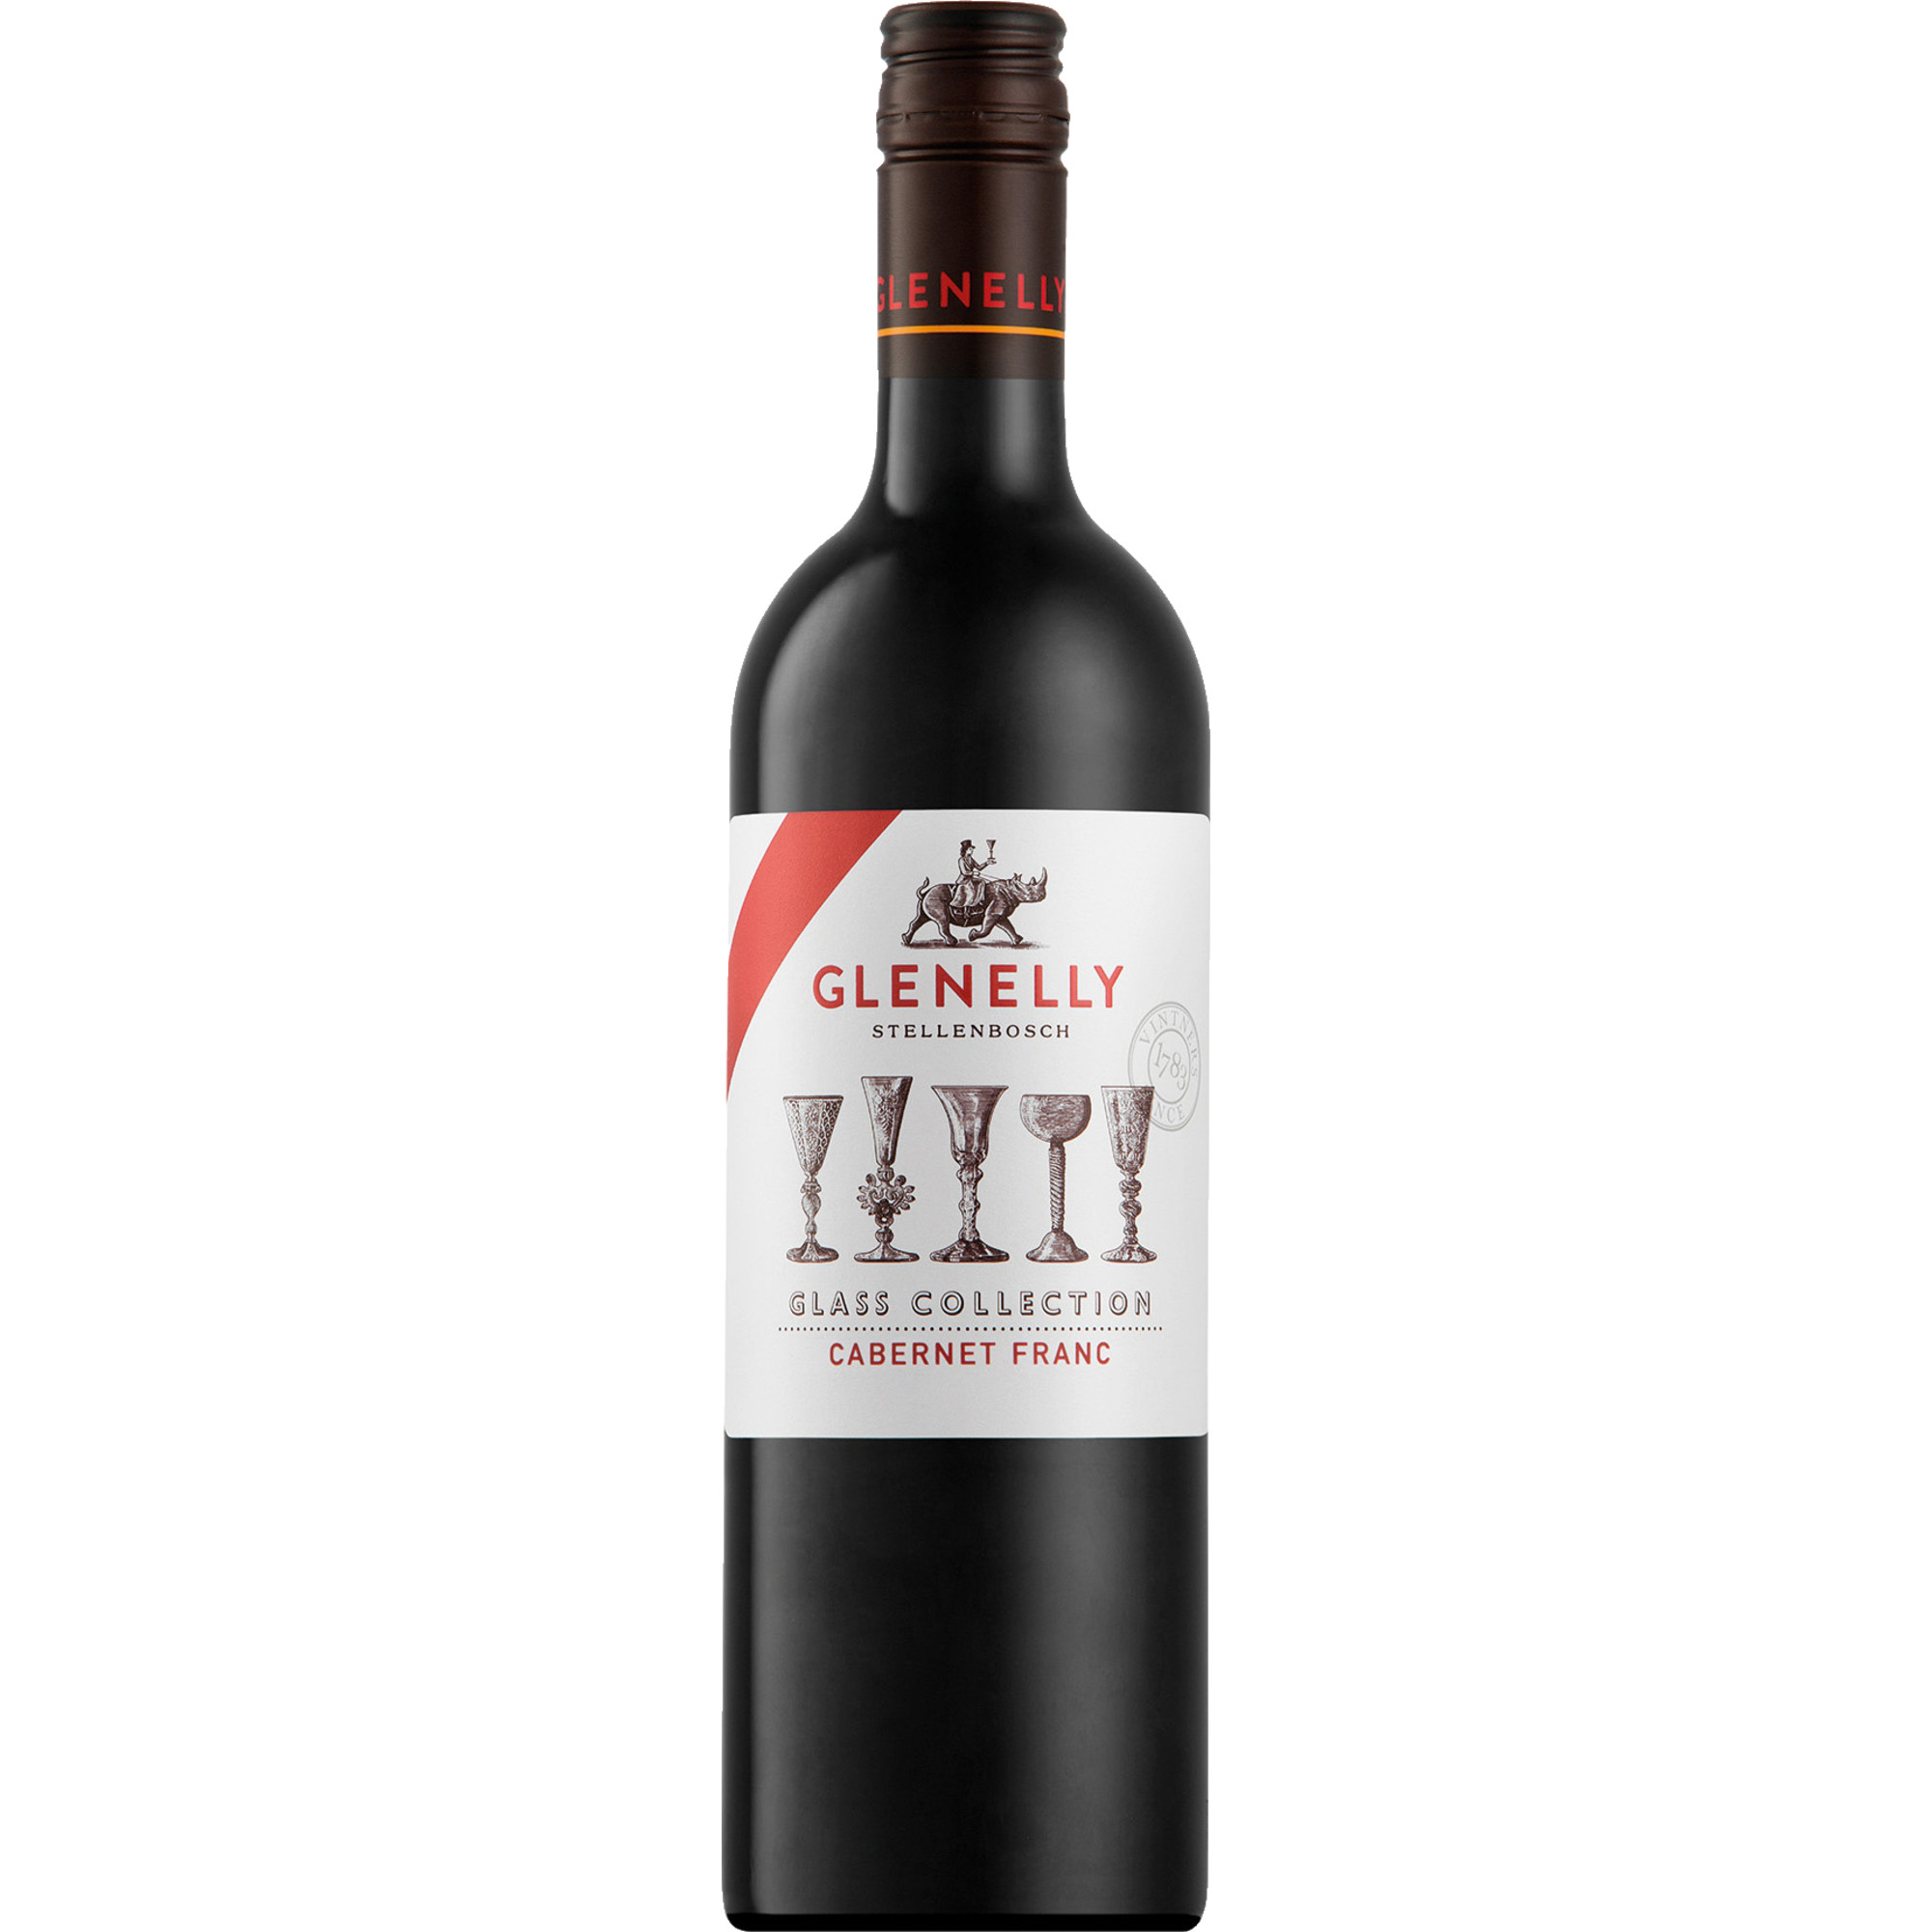 2017 Glenelly Glass Collection Cabernet Franc